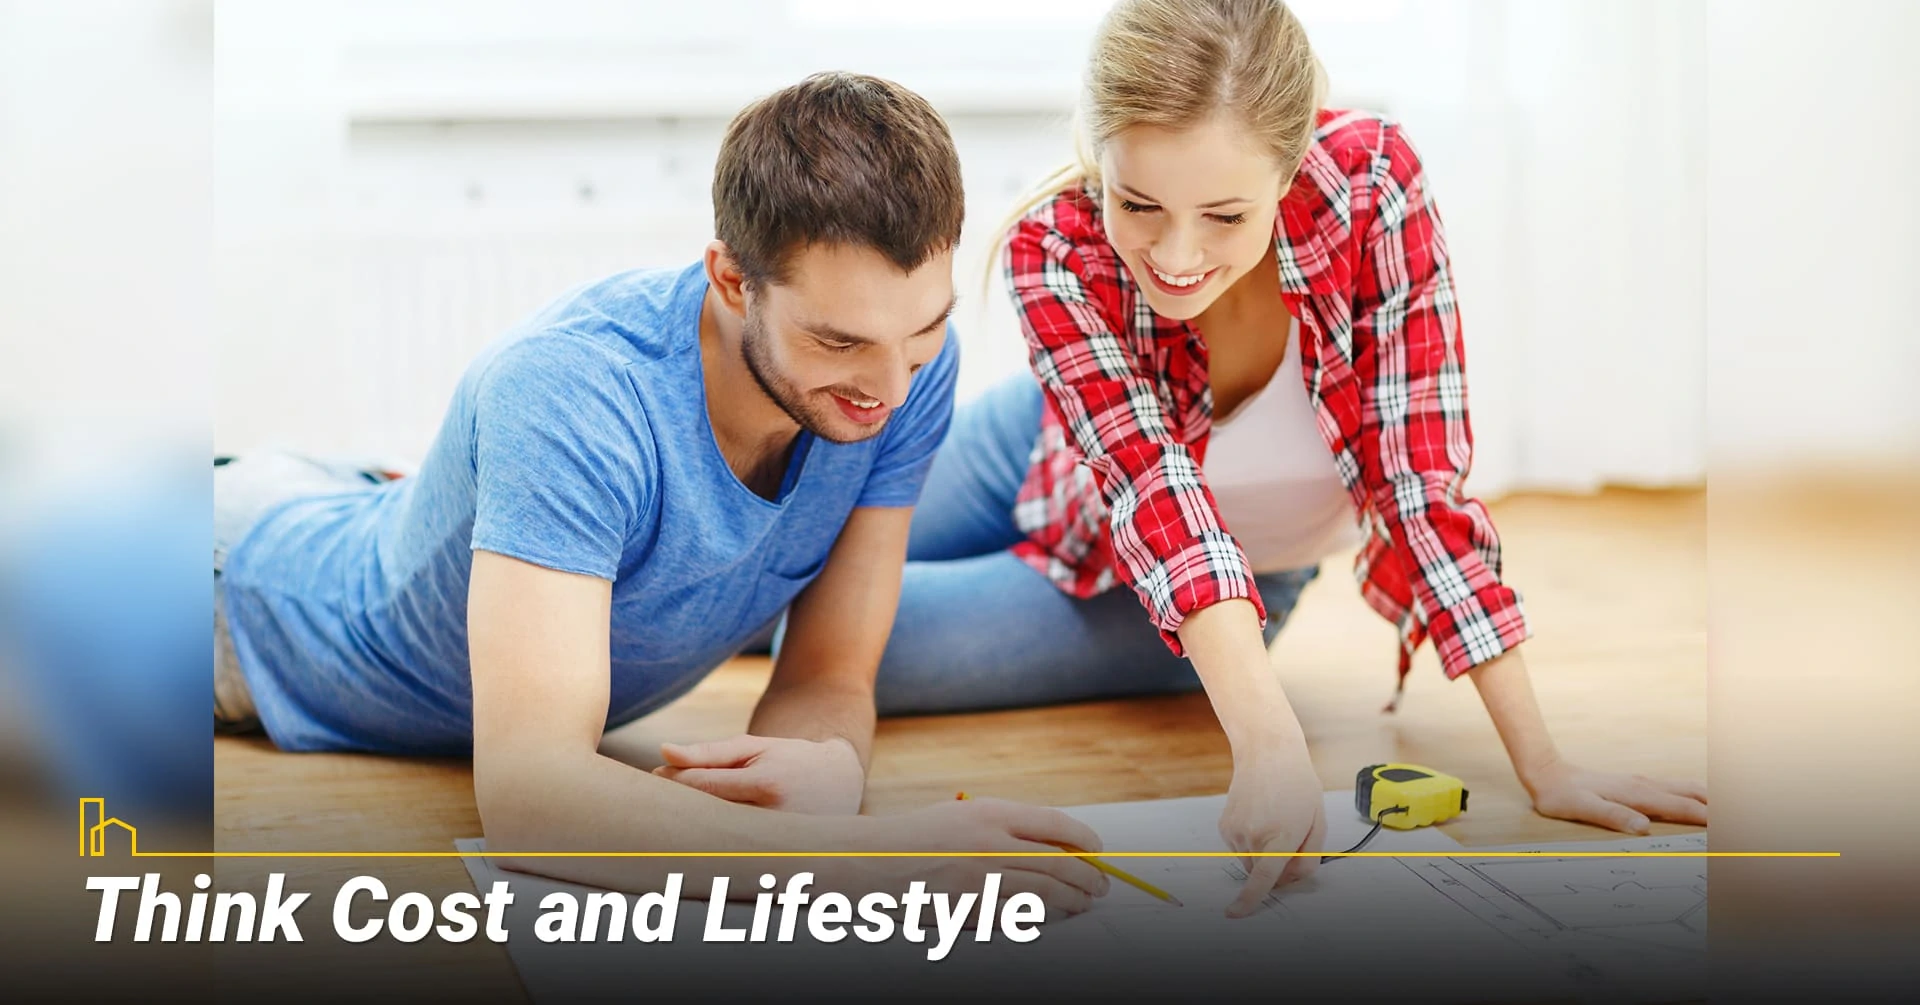 Think Cost and Lifestyle, cost and lifestyle for your considerations